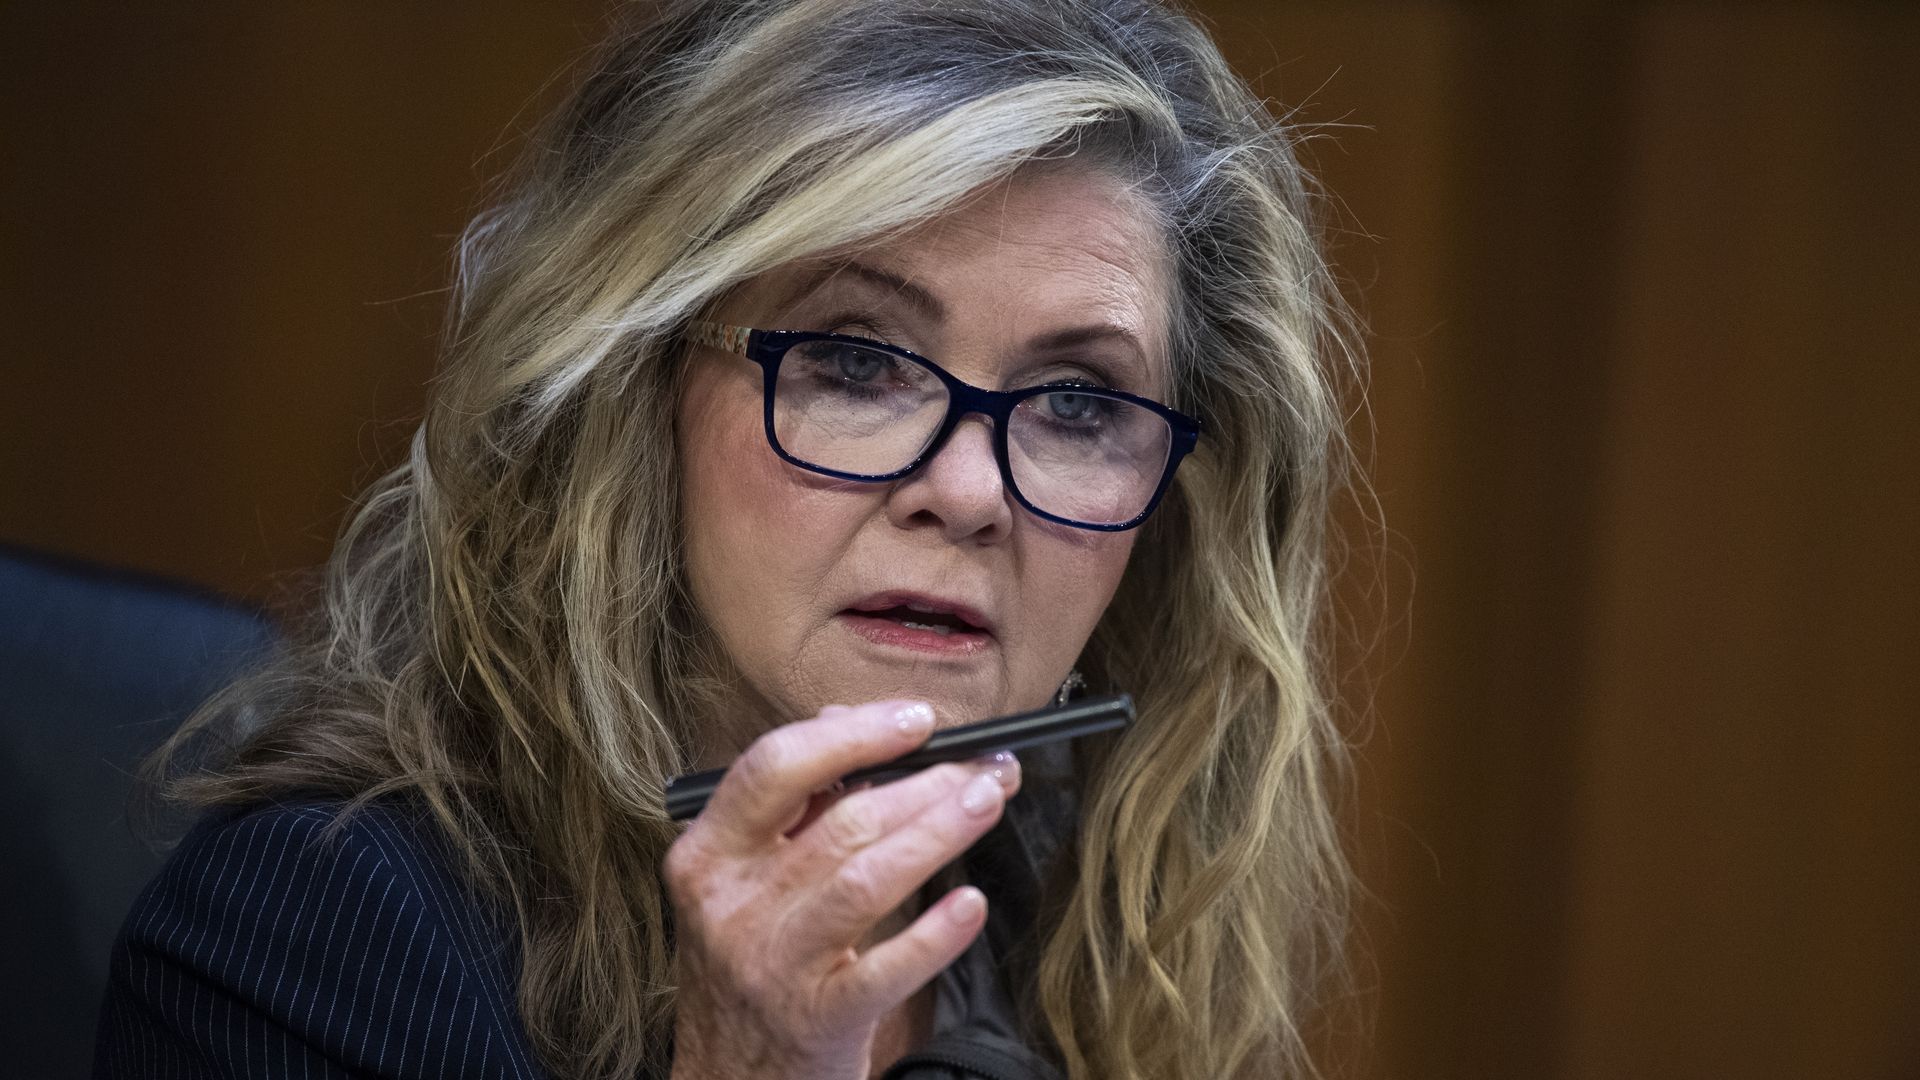 Marsha Blackburn, (R-TN) speaks during a Senate Judiciary Committee hearing to examine Texas's abortion law on Capitol Hill on September 29, 2021 in Washington, DC.